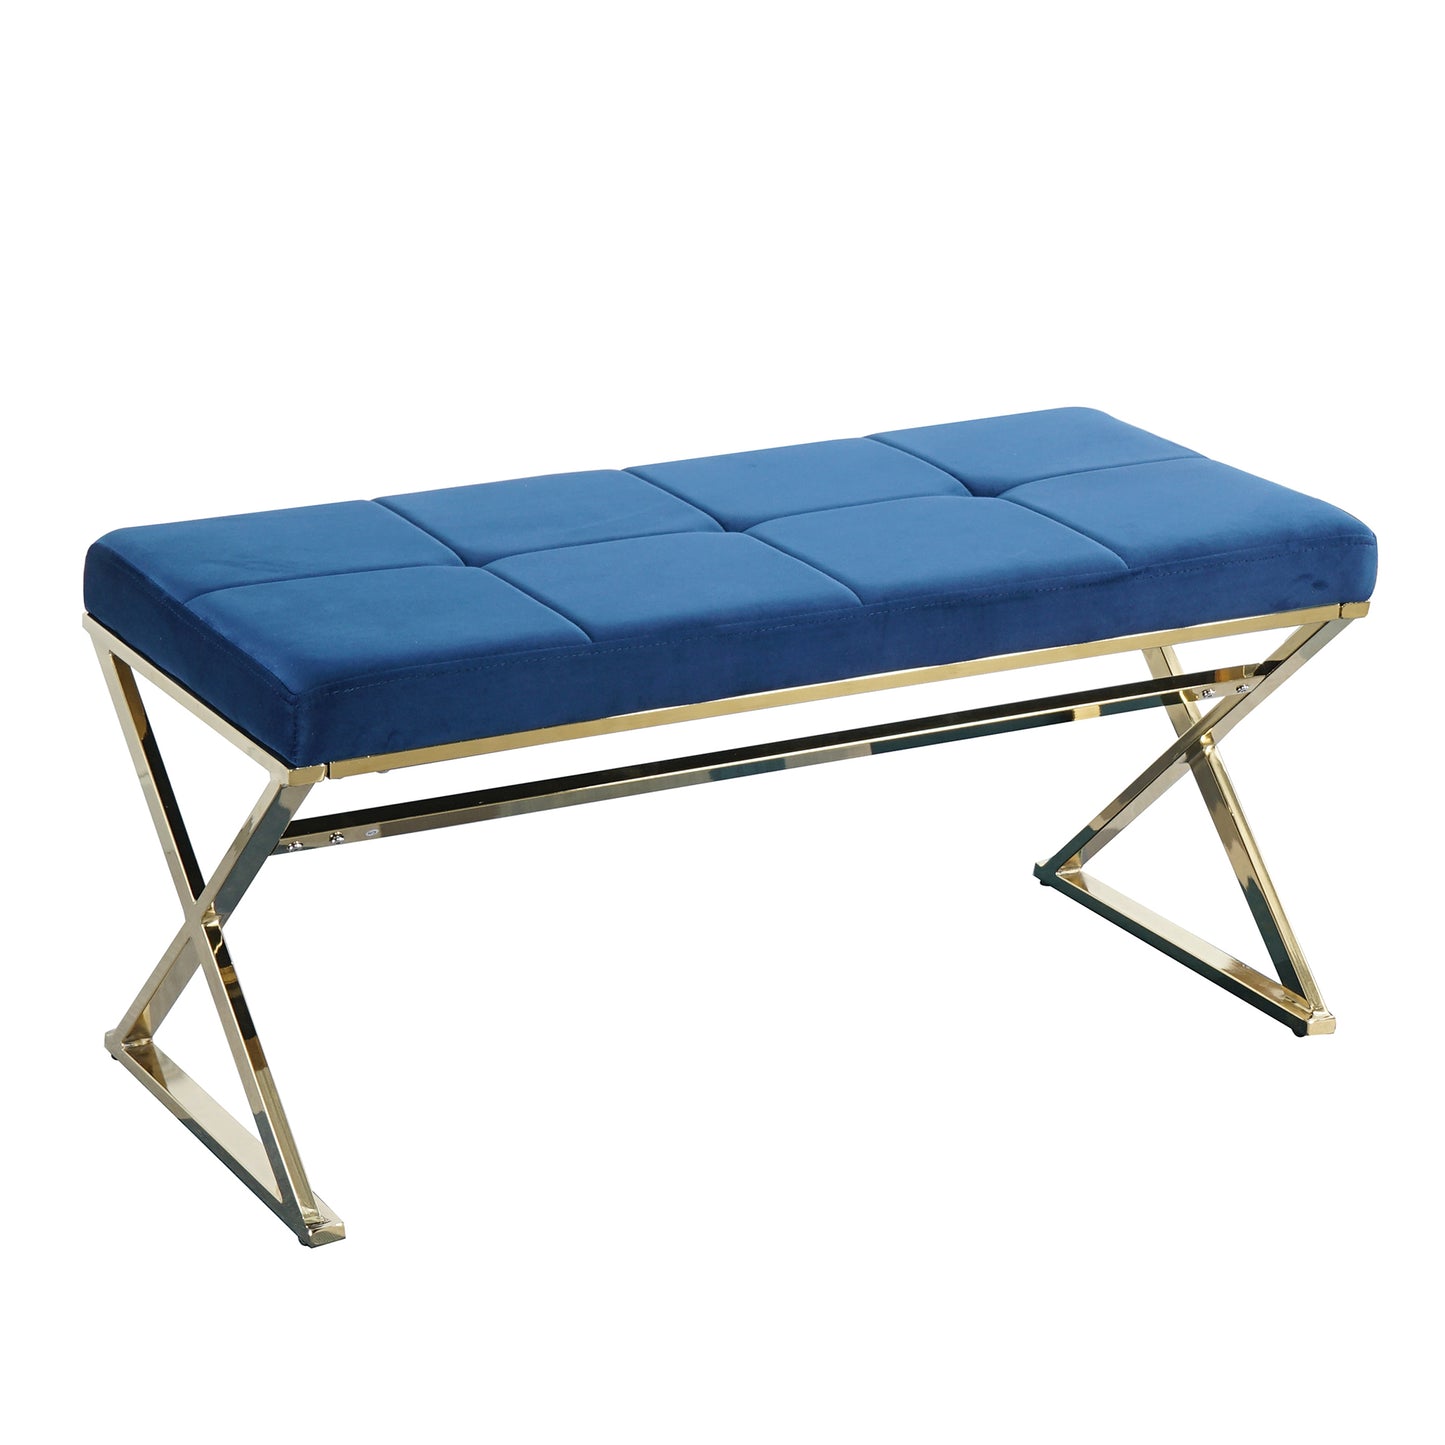 SYNGAR Upholstered Bedroom Bench, Modern Velvet Footstool Bench Seat for Living Room, Hallway, Entryway, Ottoman Bench with Gold Metal Legs, Blue